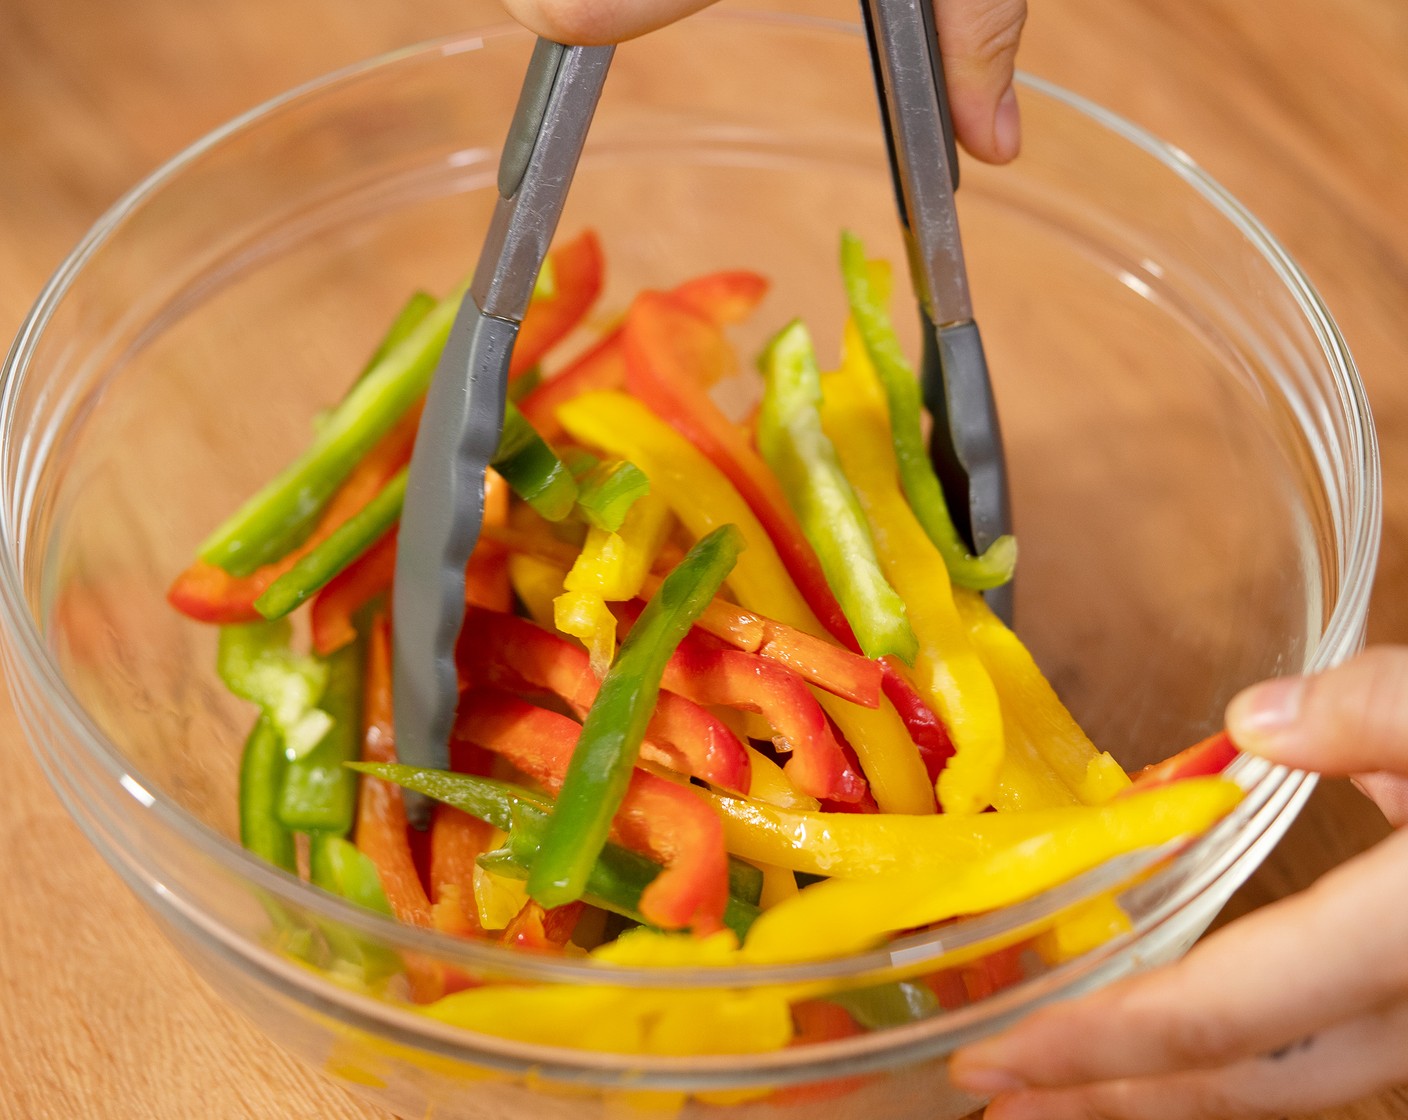 step 3 Toss the Red Bell Pepper (1), Yellow Bell Pepper (1), and Green Bell Pepper (1) with Oil (1/2 Tbsp) in a mixing bowl.